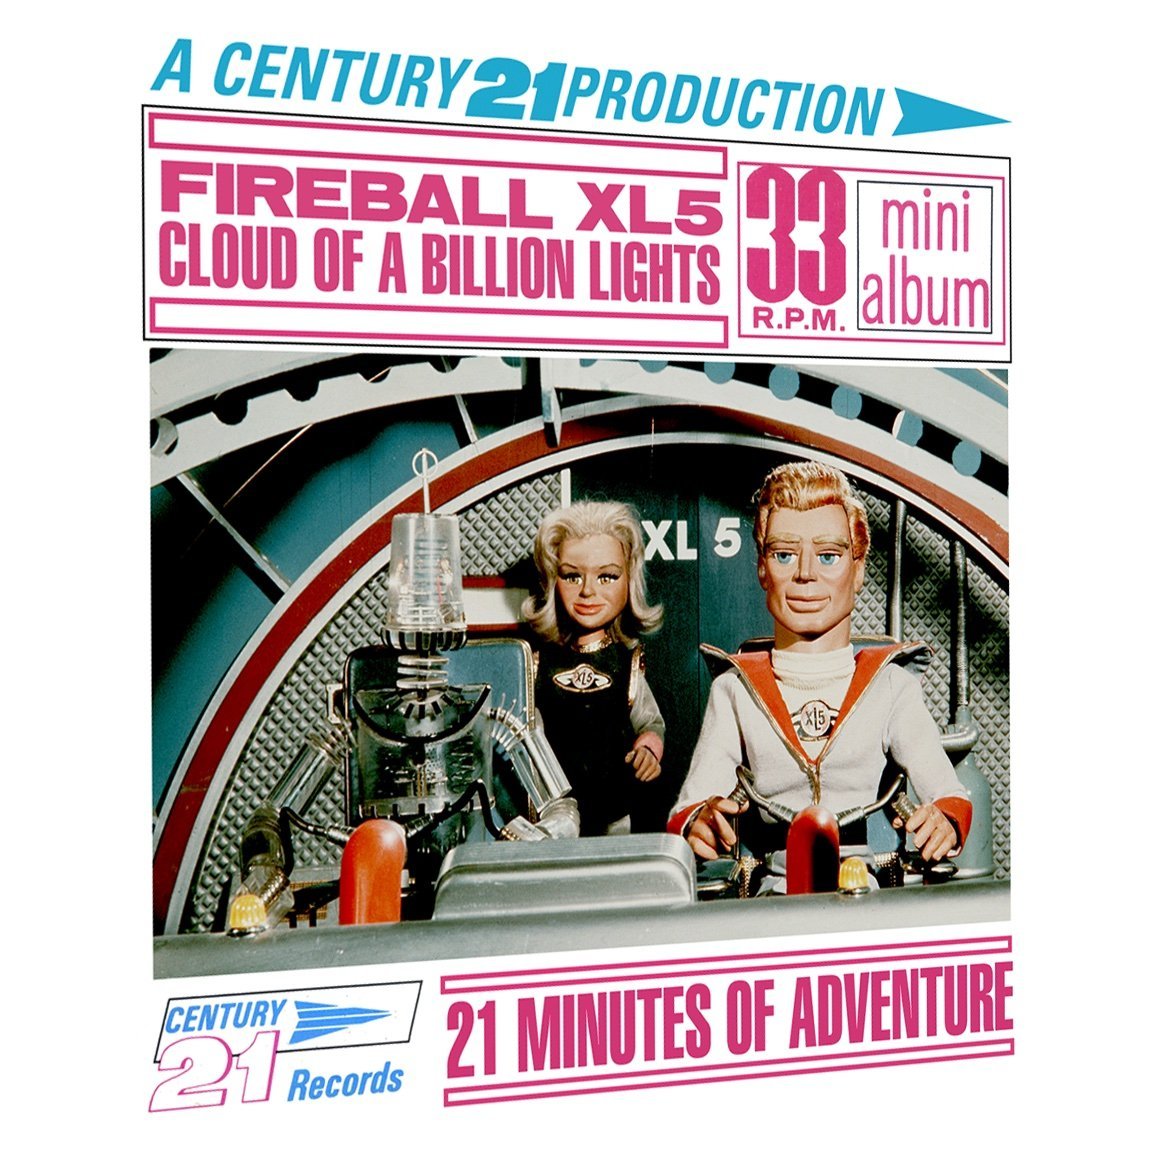 Cloud of a Billion Lights - The Gerry Anderson Store